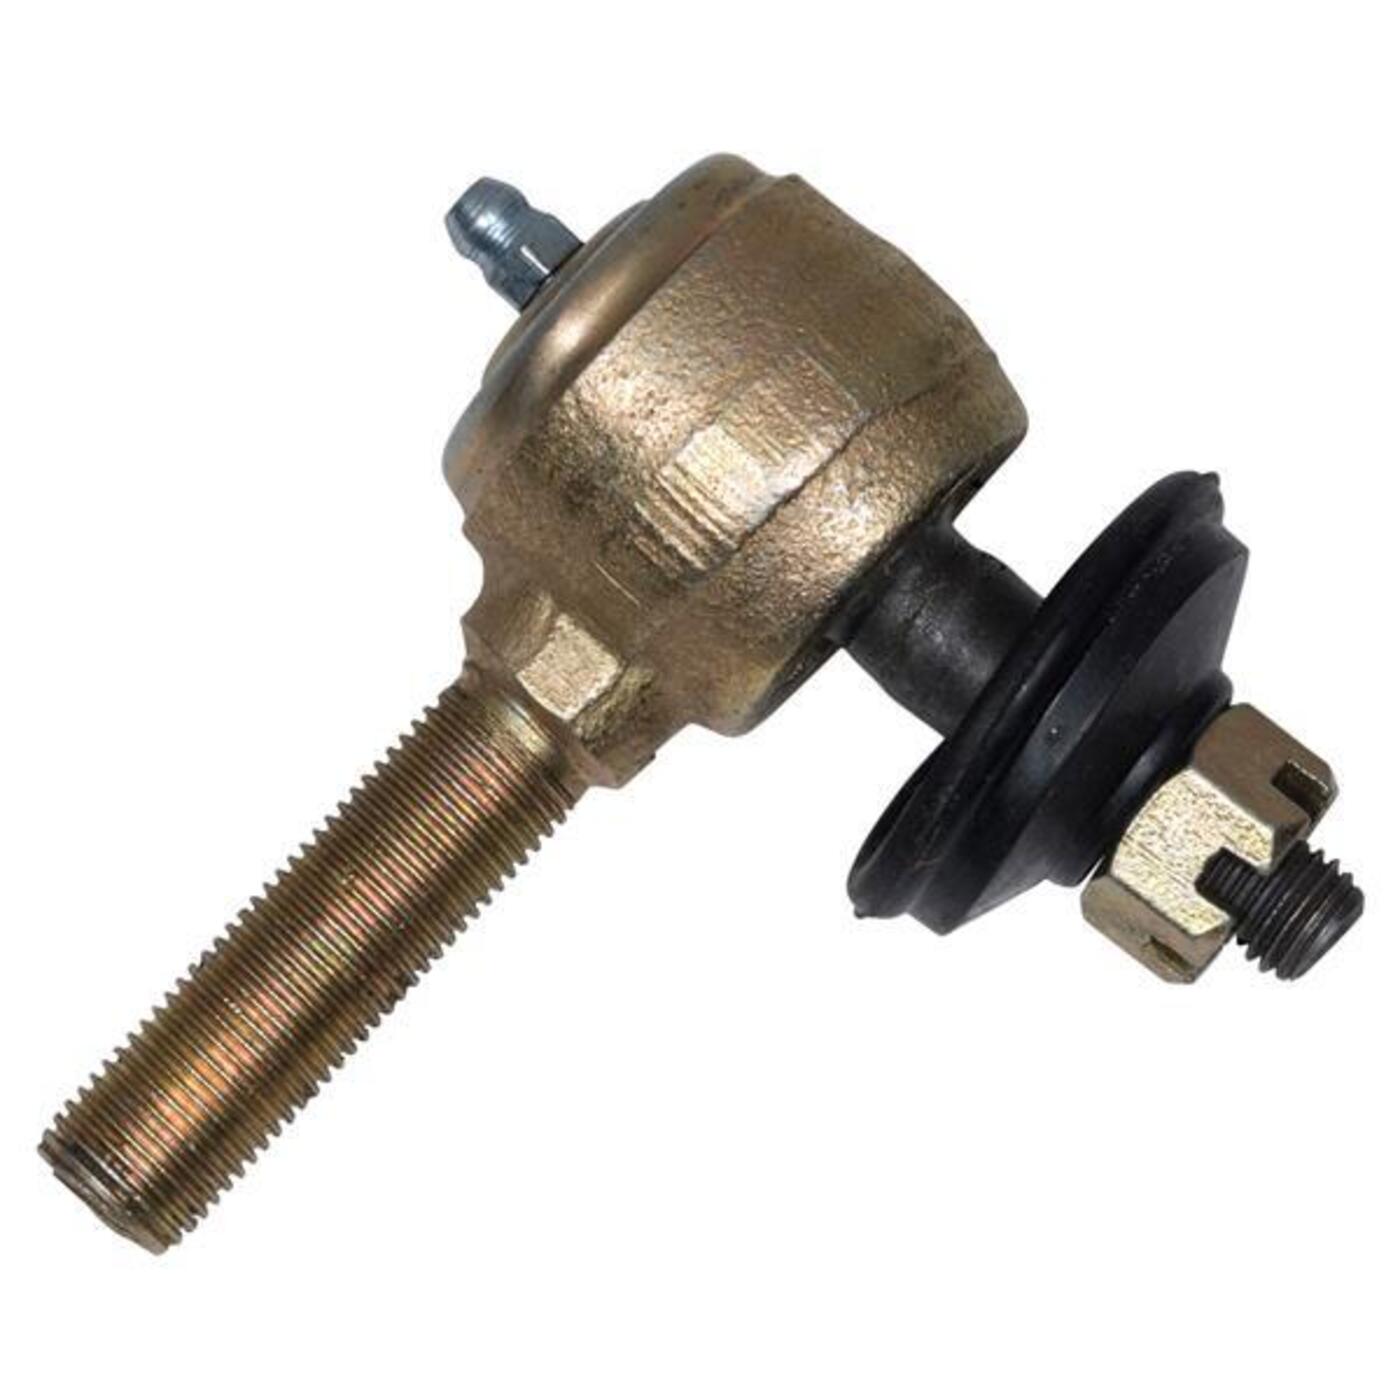 Club Car DS Left-Threaded Tie Rod End (Years 1976-Up)